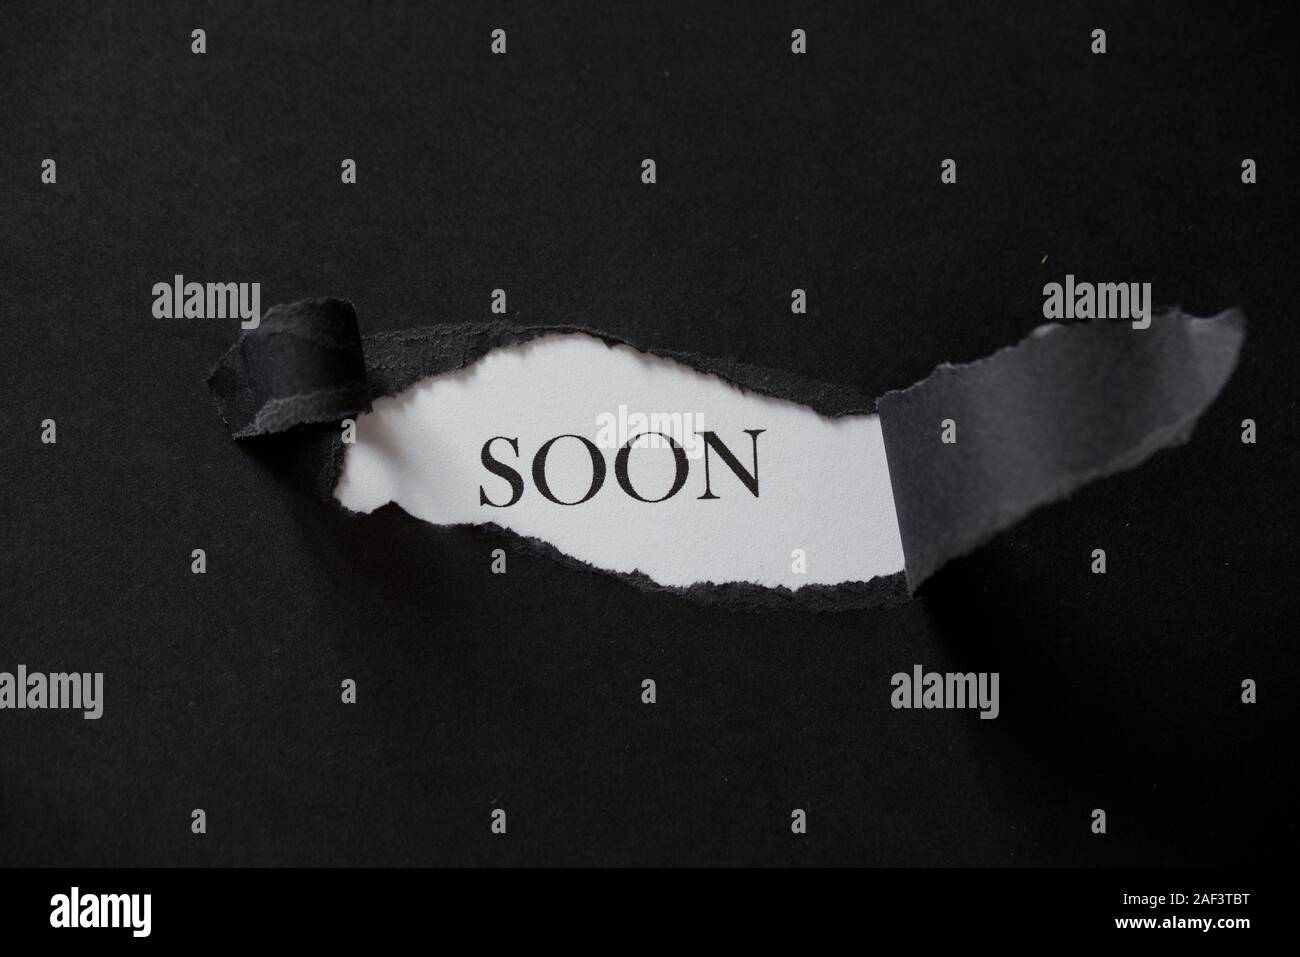 Word SOON printed on a white background with black torn paper. Stock Photo